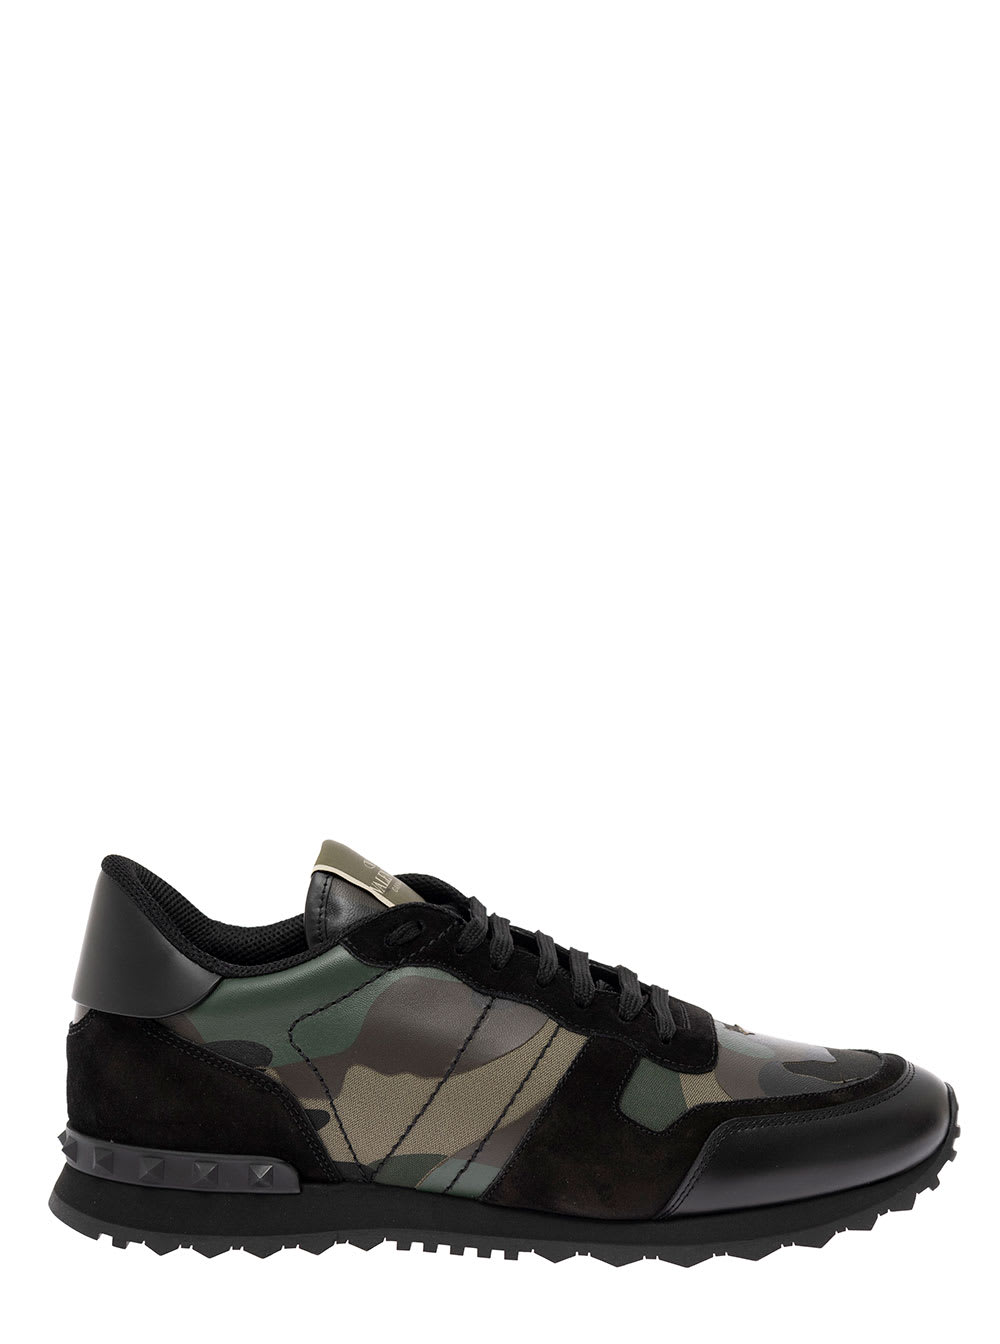 Valentino Garavani Mans Rockrunner Camouflage Noir Leather And Fabric Sneakers